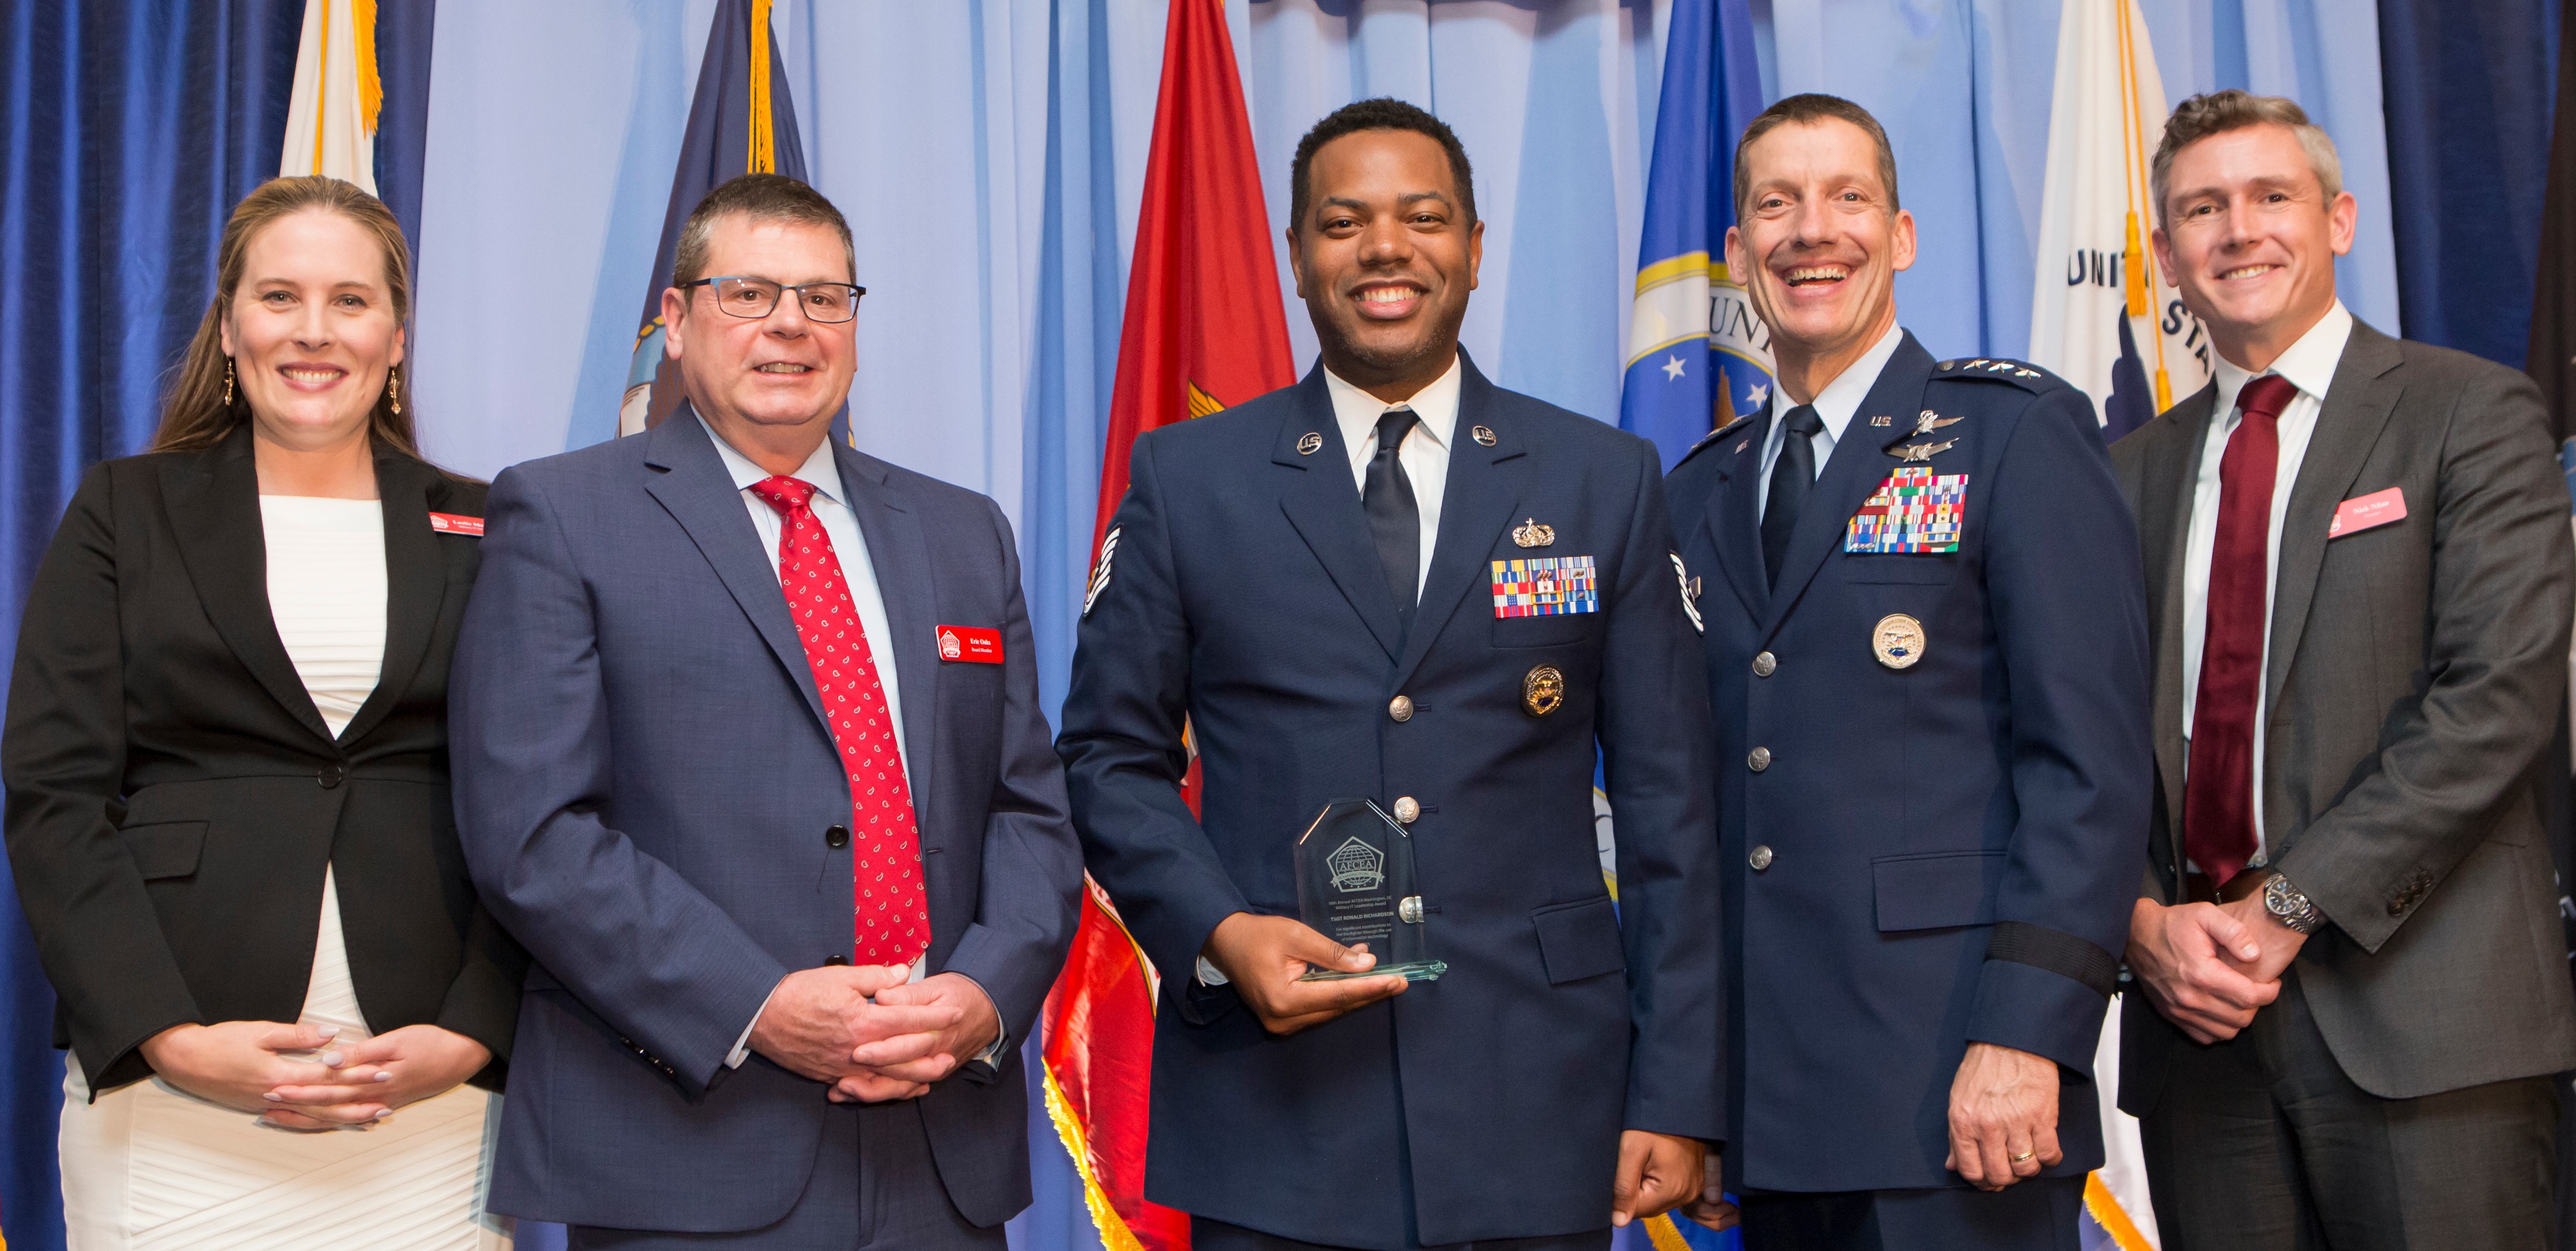 U.S. Air Force Tech. Sgt. Ronald Richardson, poses after receiving an award during AFCEA's Military IT Leadership Awards ceremony